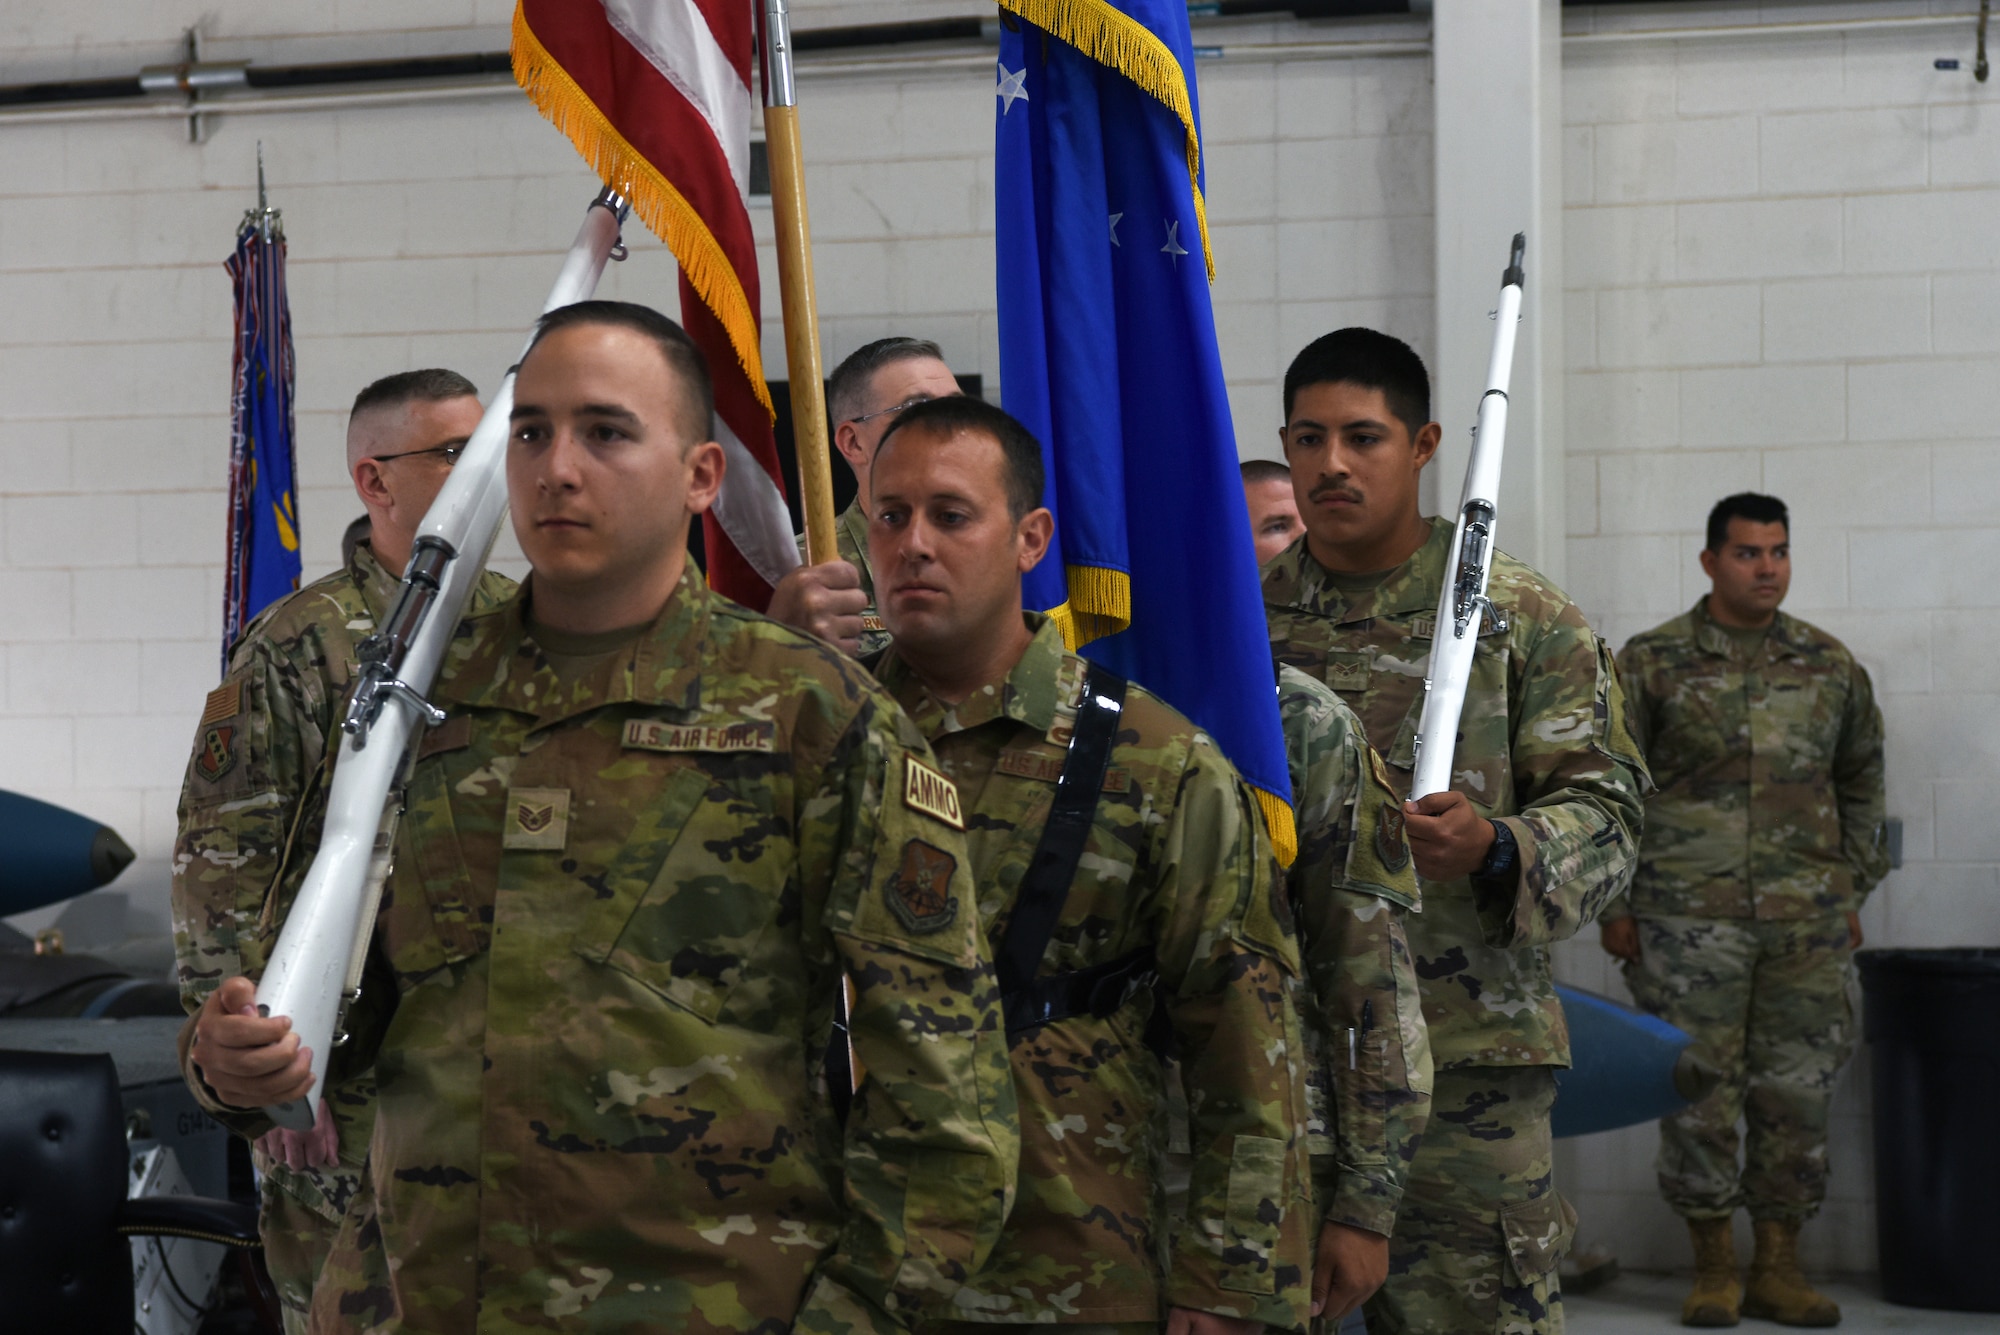 Members of the 7th Munitions Squadron honor guard march before presenting the colors on Dyess Air Force Base Texas, 16 Jun 2022. The mission of the 7th Munitions Squadron is to provide reliable munitions and release equipment. (U.S. Air Force photo by Senior Airman Sophia Robello)